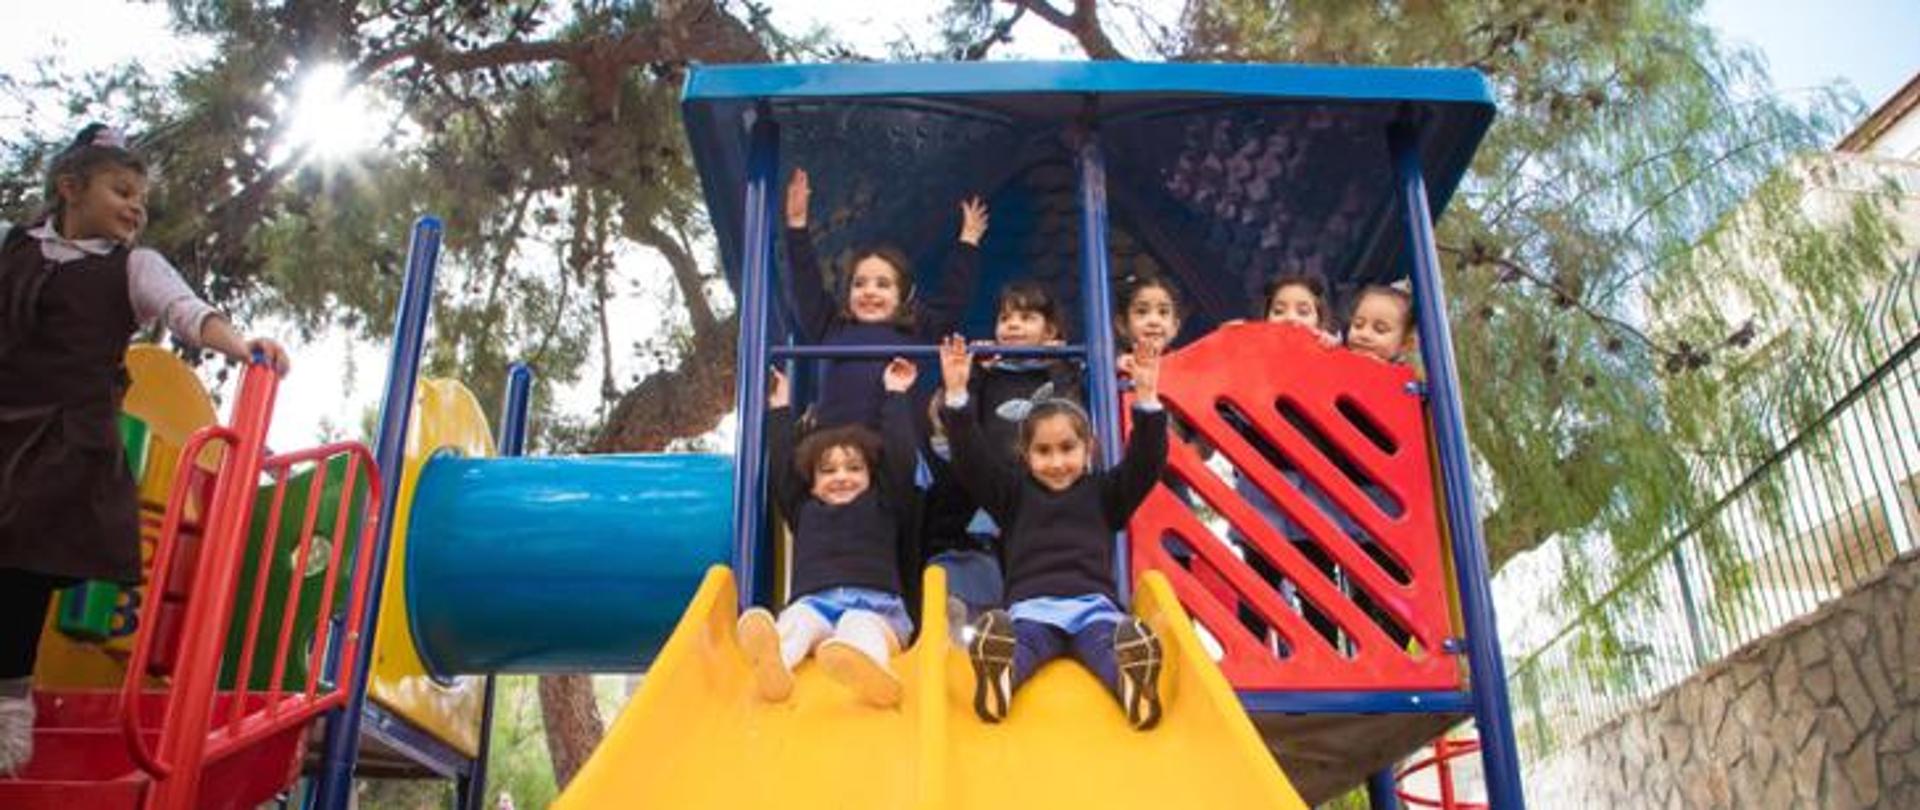 Improving quality of education for girls through establishing a playground at the Orthodox School of Bethany in East Jerusalem
